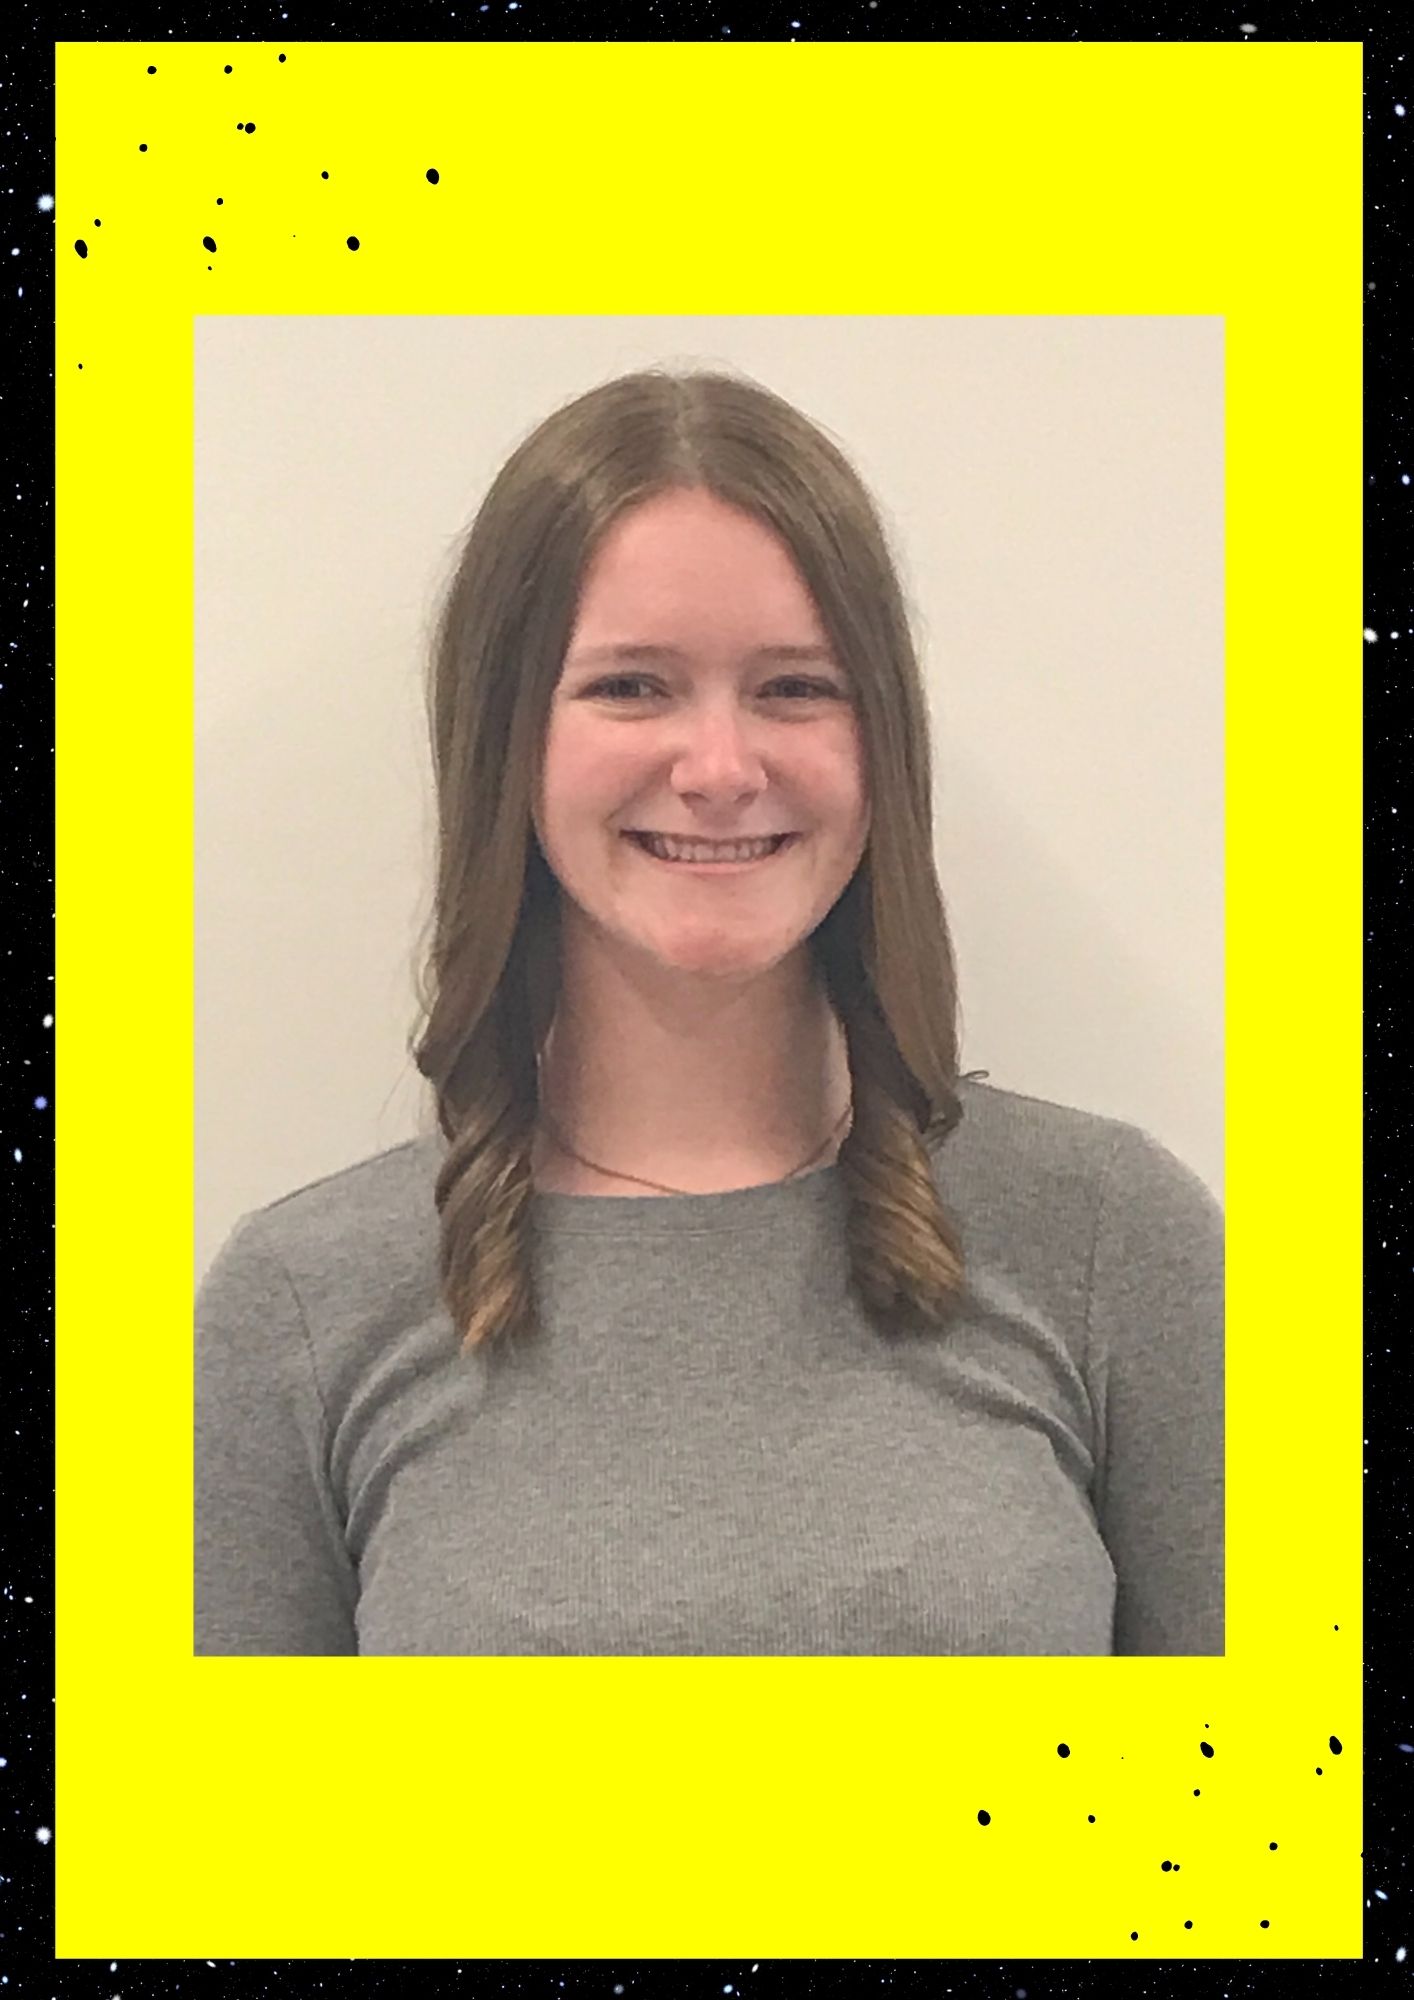 Emilee smiles for a professional headshot. The headshot photo is outlined in a bright yellow frame. 